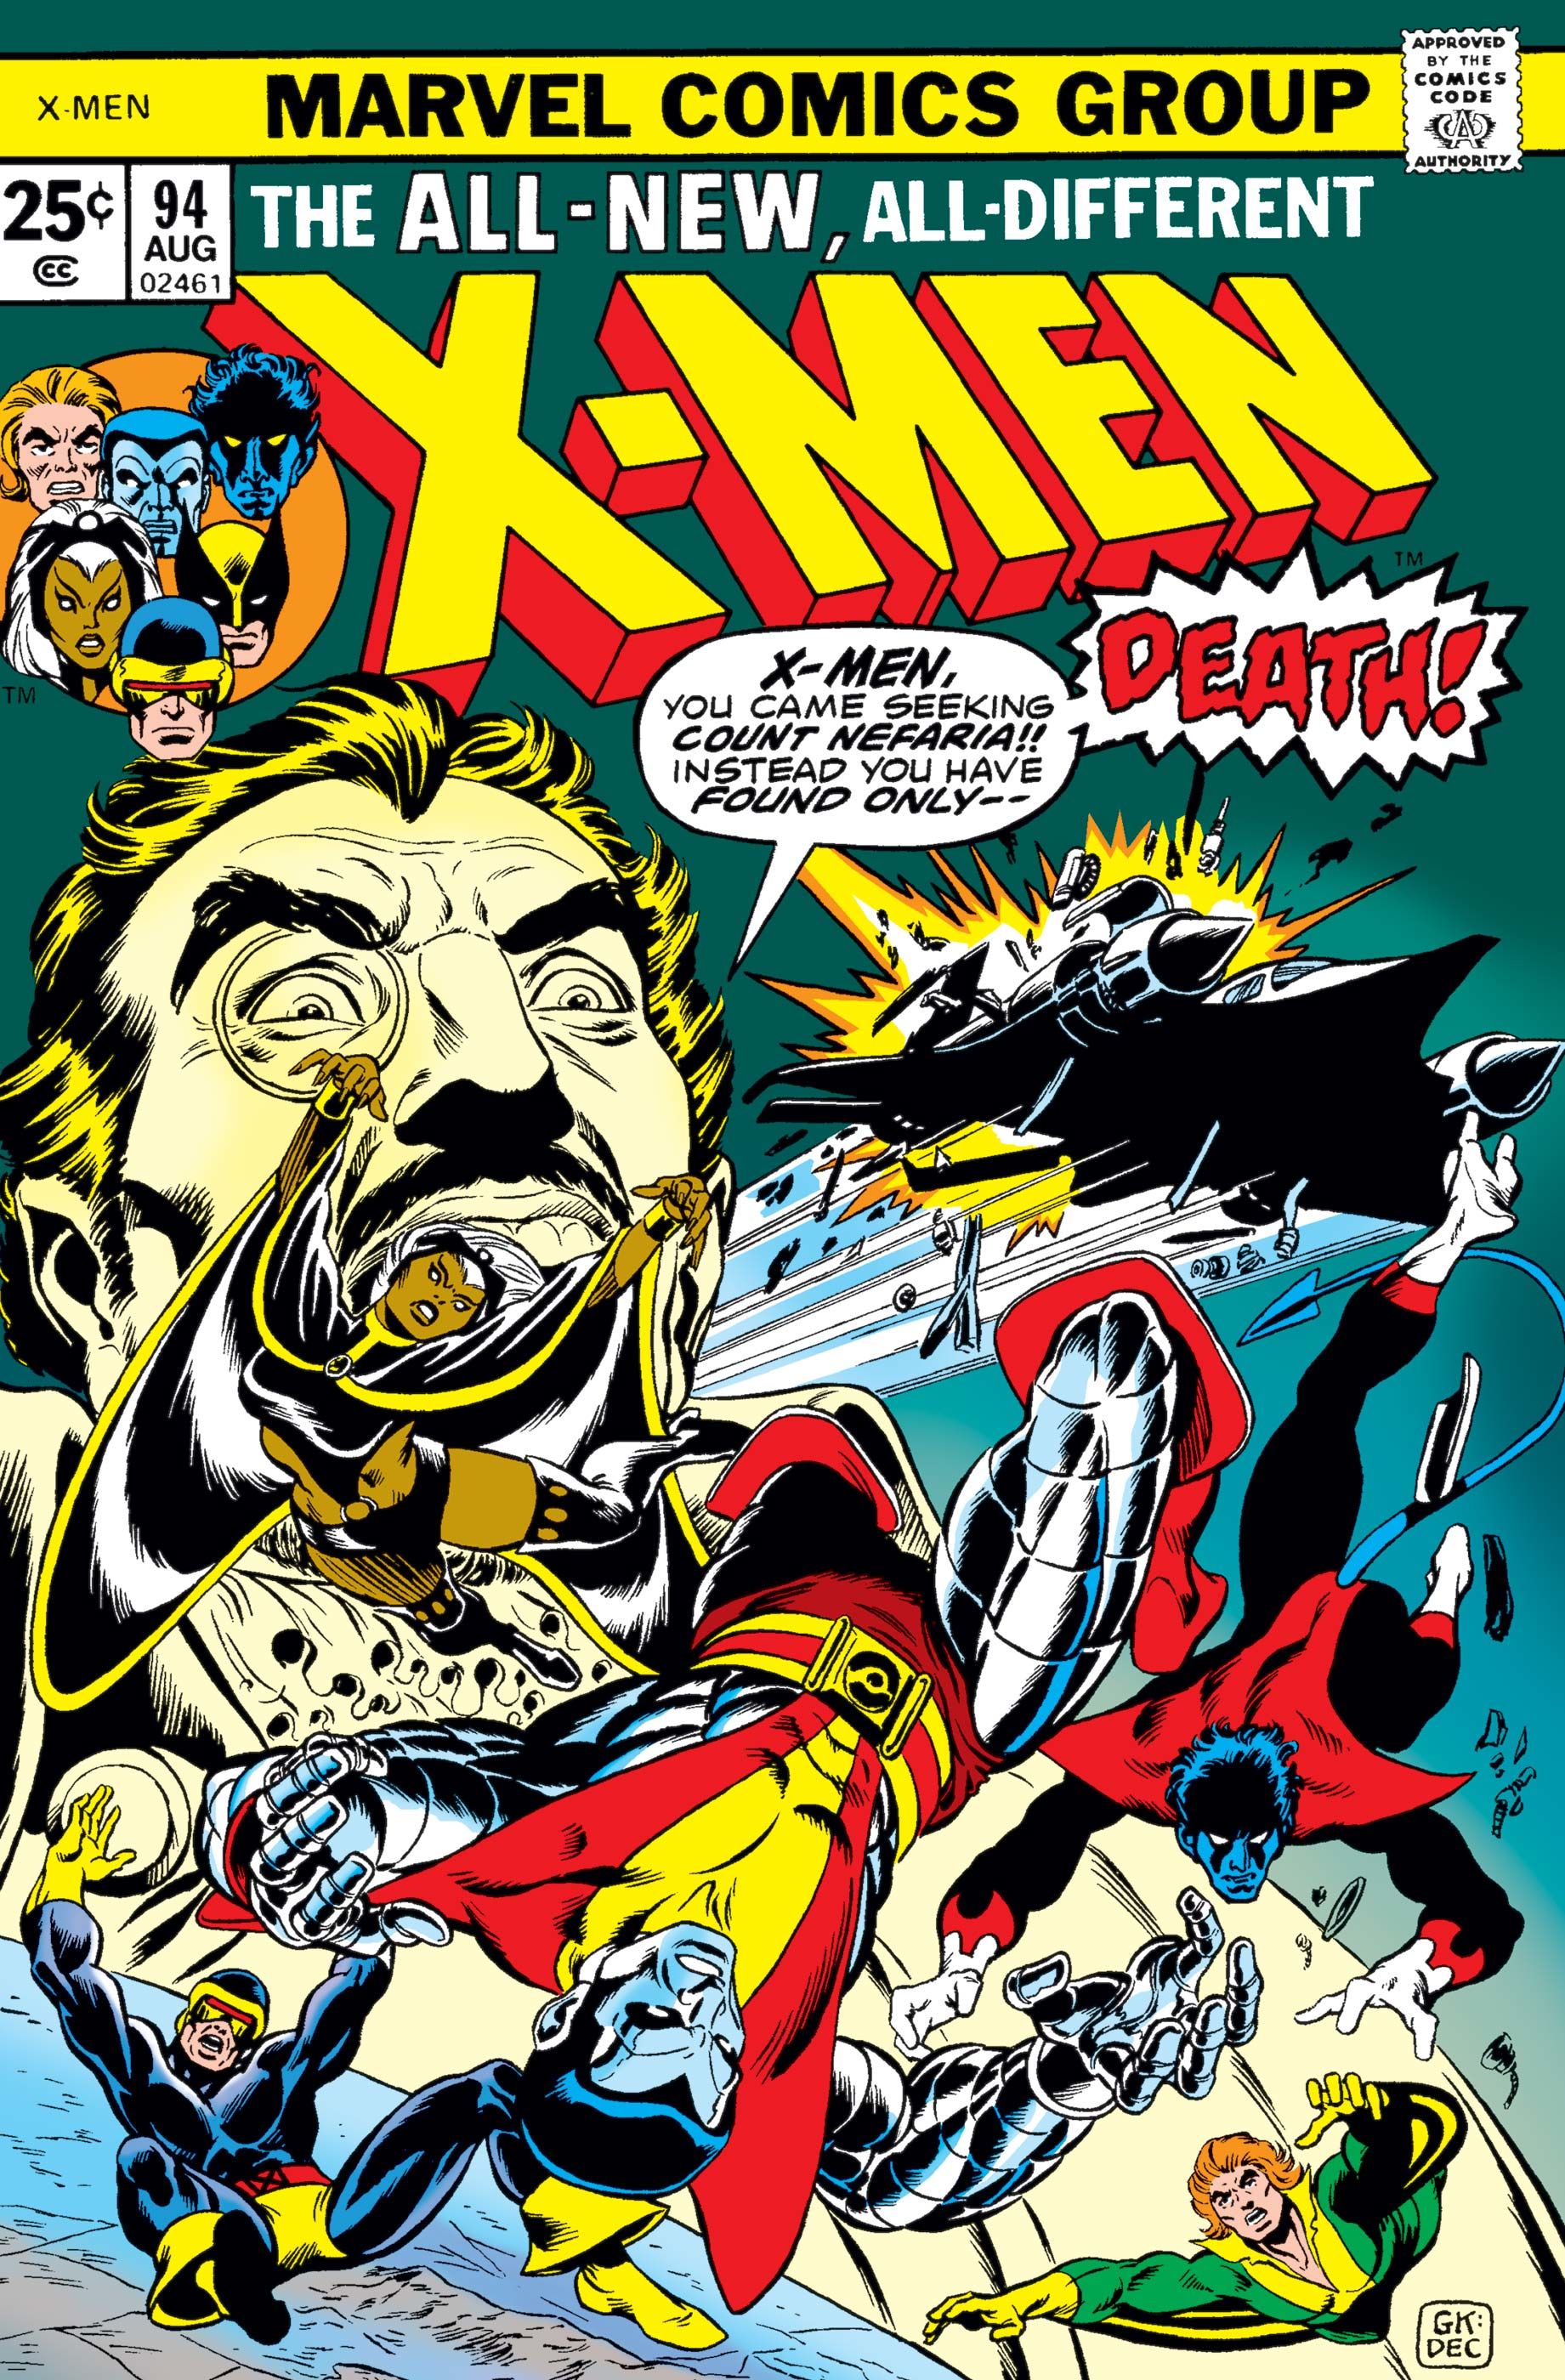 The cover to the classic X-Men #94